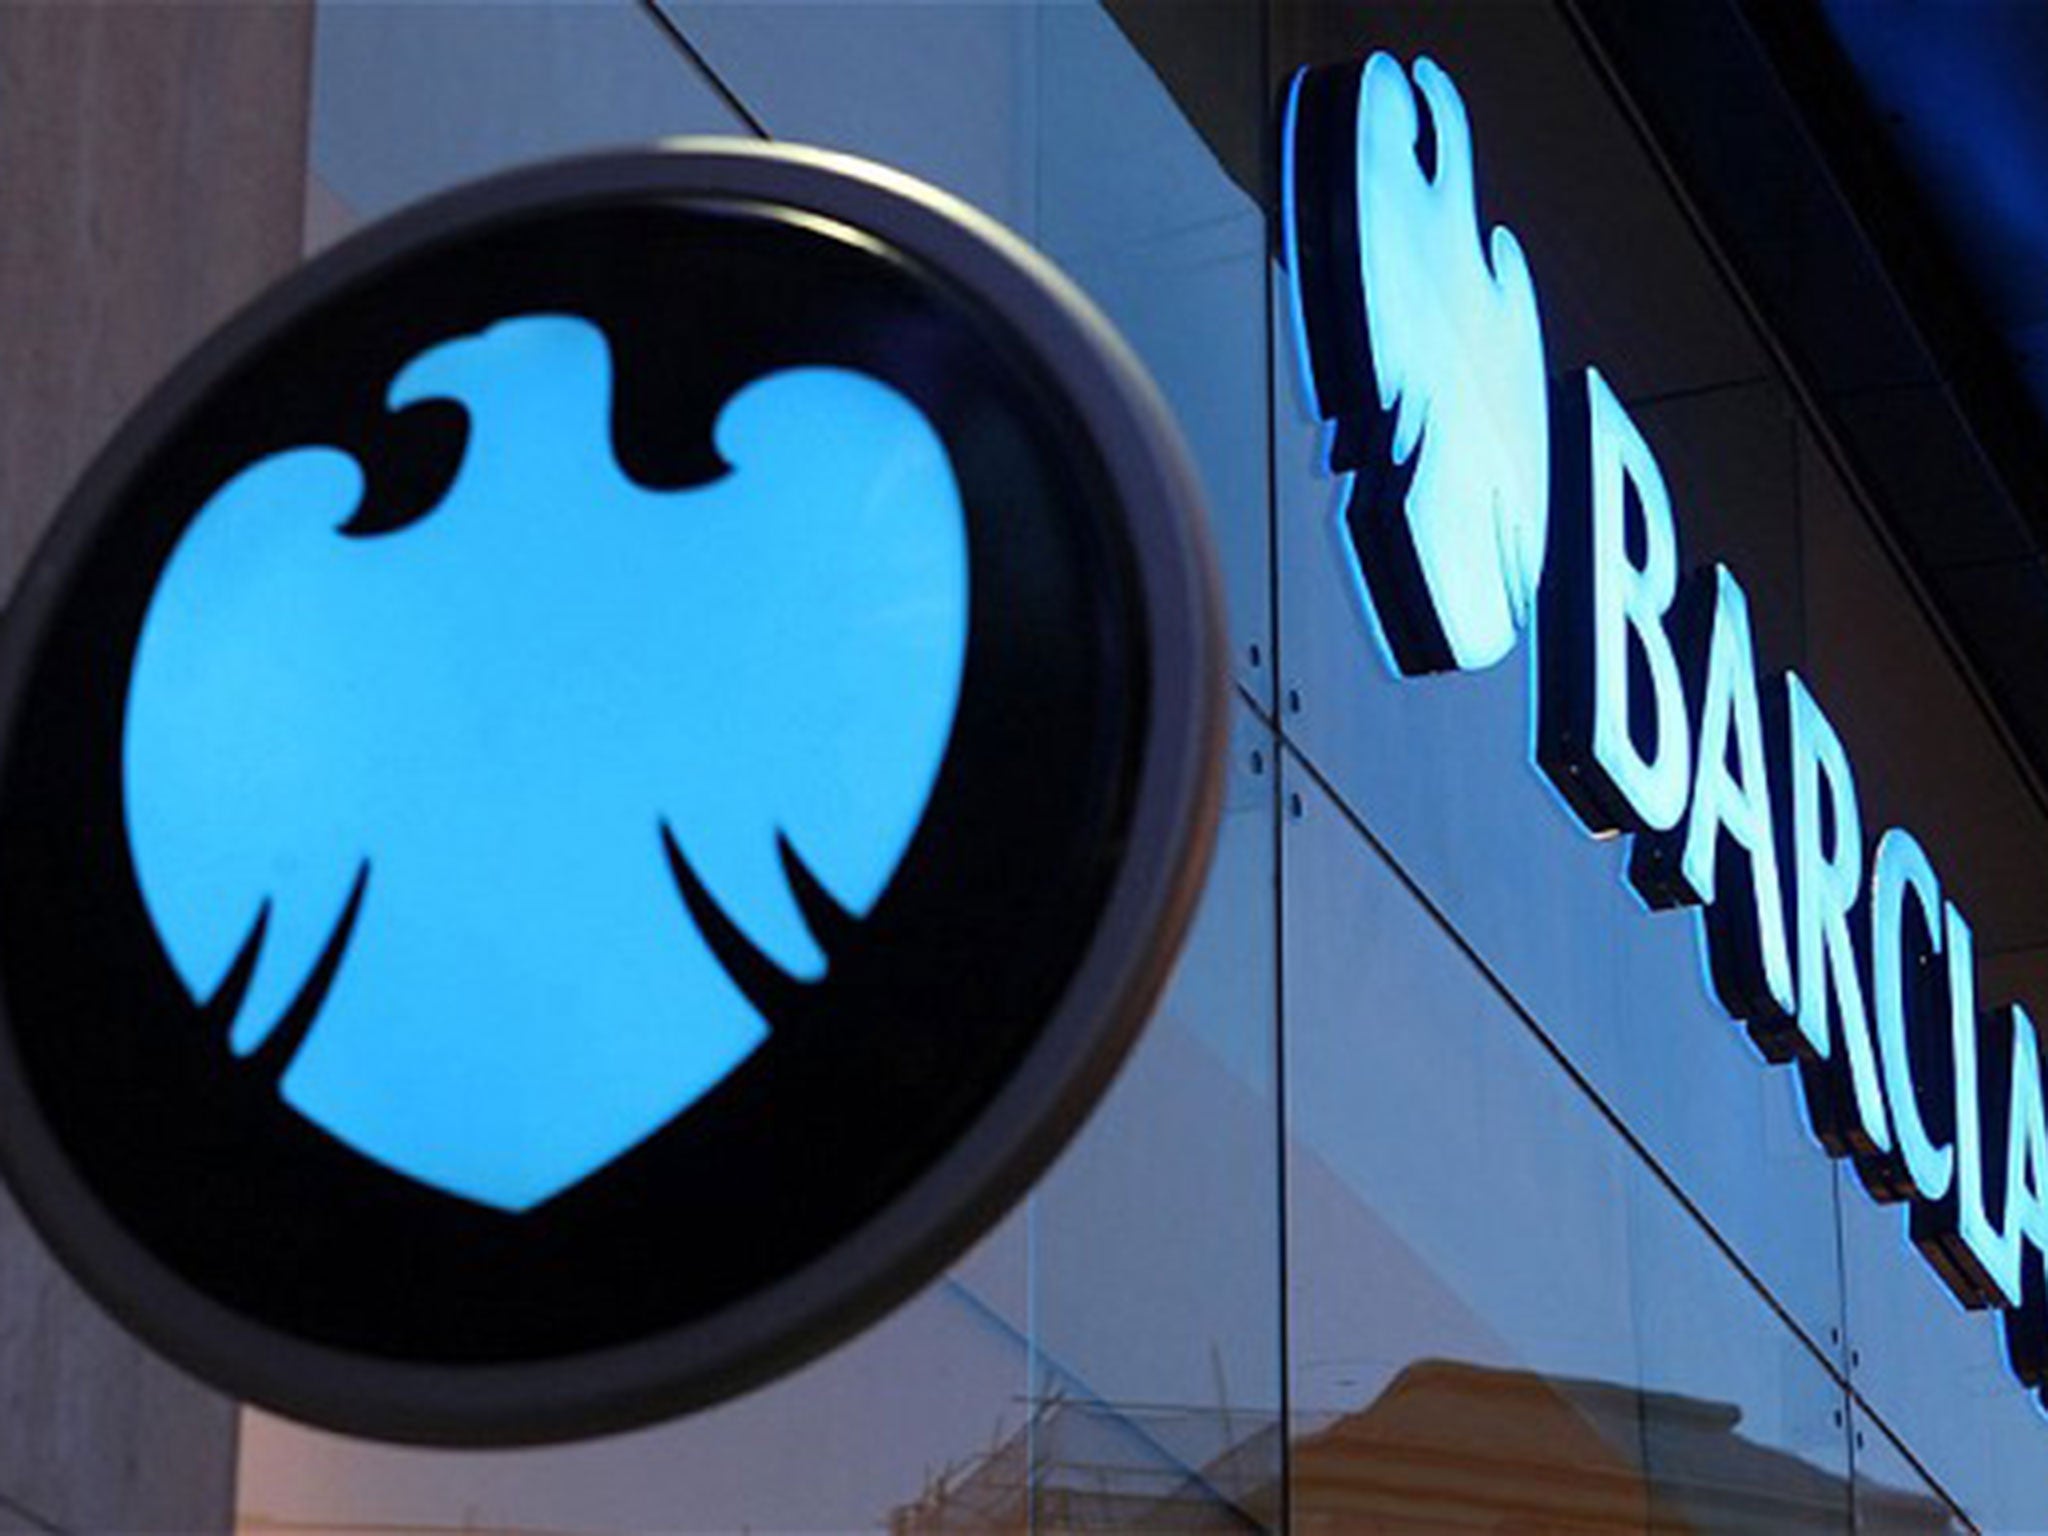 Barclays included £449m of “litigation and conduct” issues in its adjusted results, but it excluded £2.35bn.